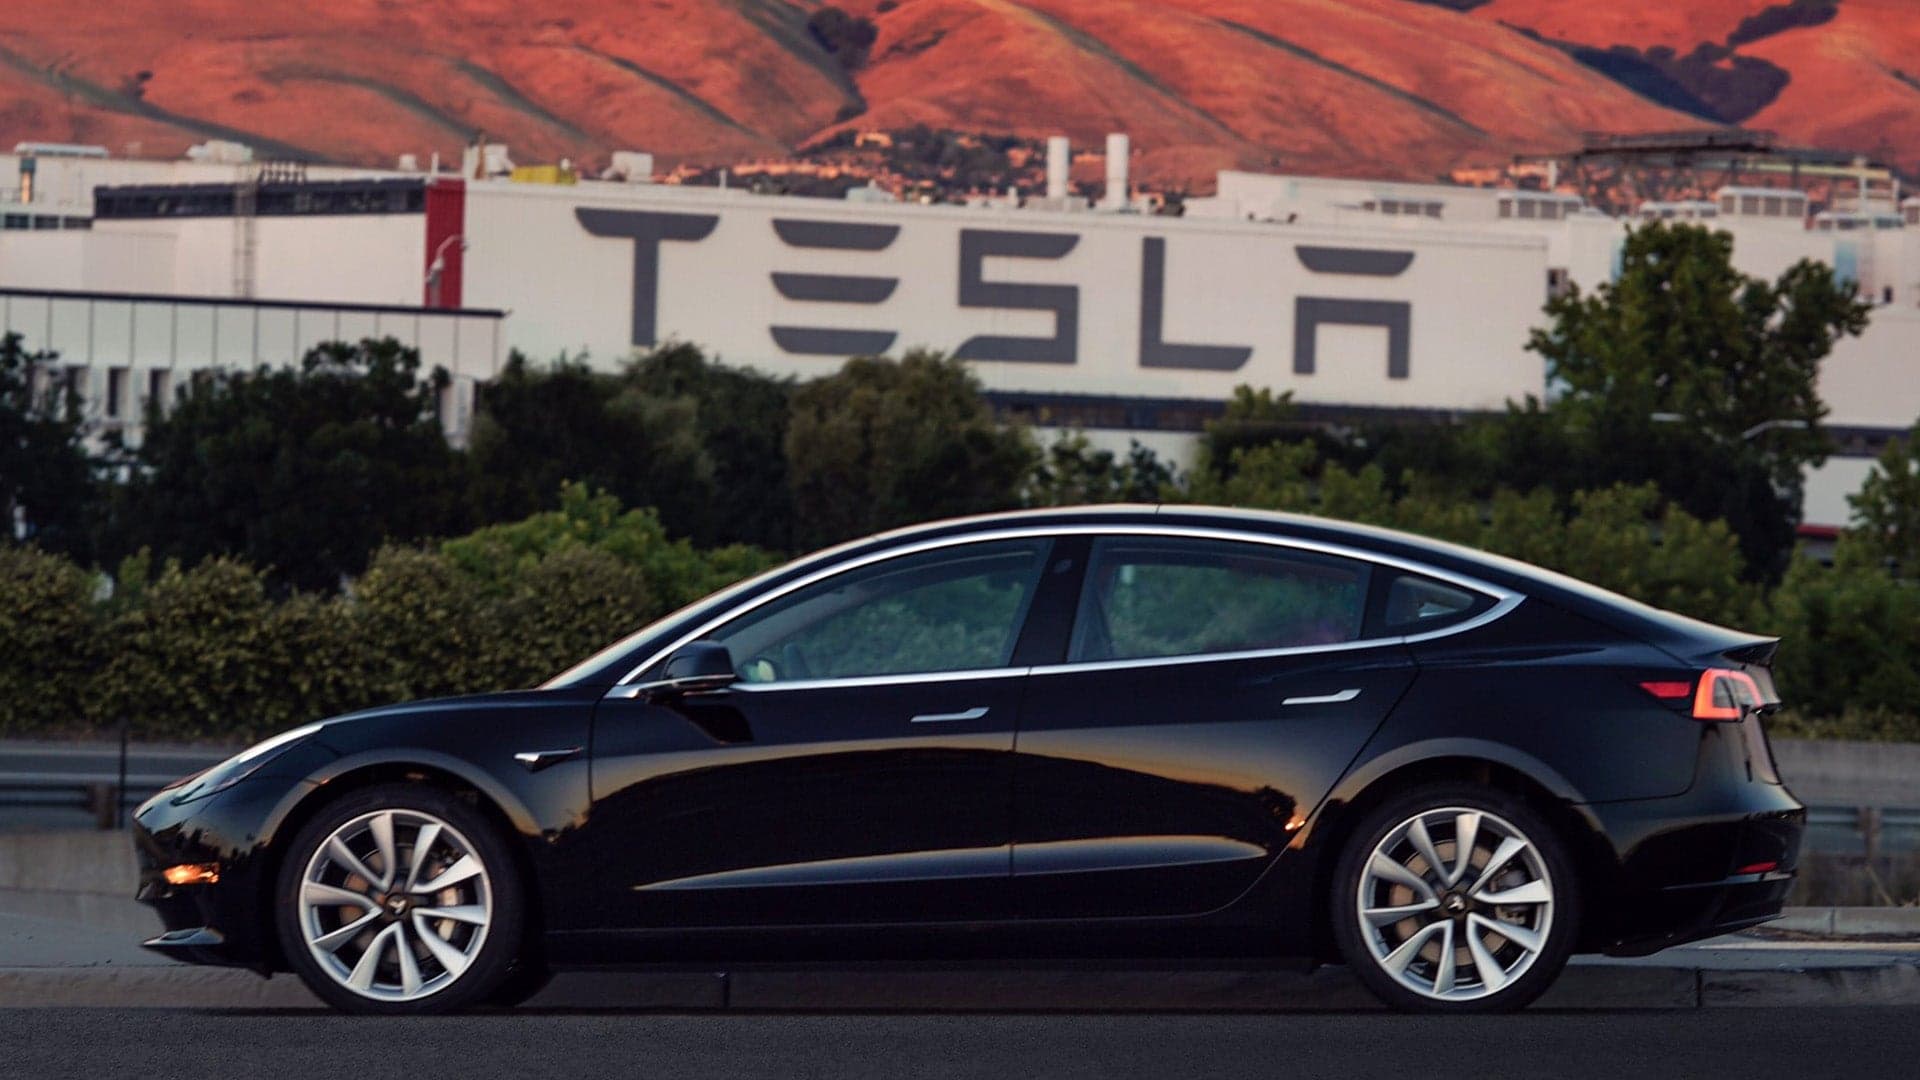 Tesla Tells Employees They Can’t Resell Their Model 3s for Profit